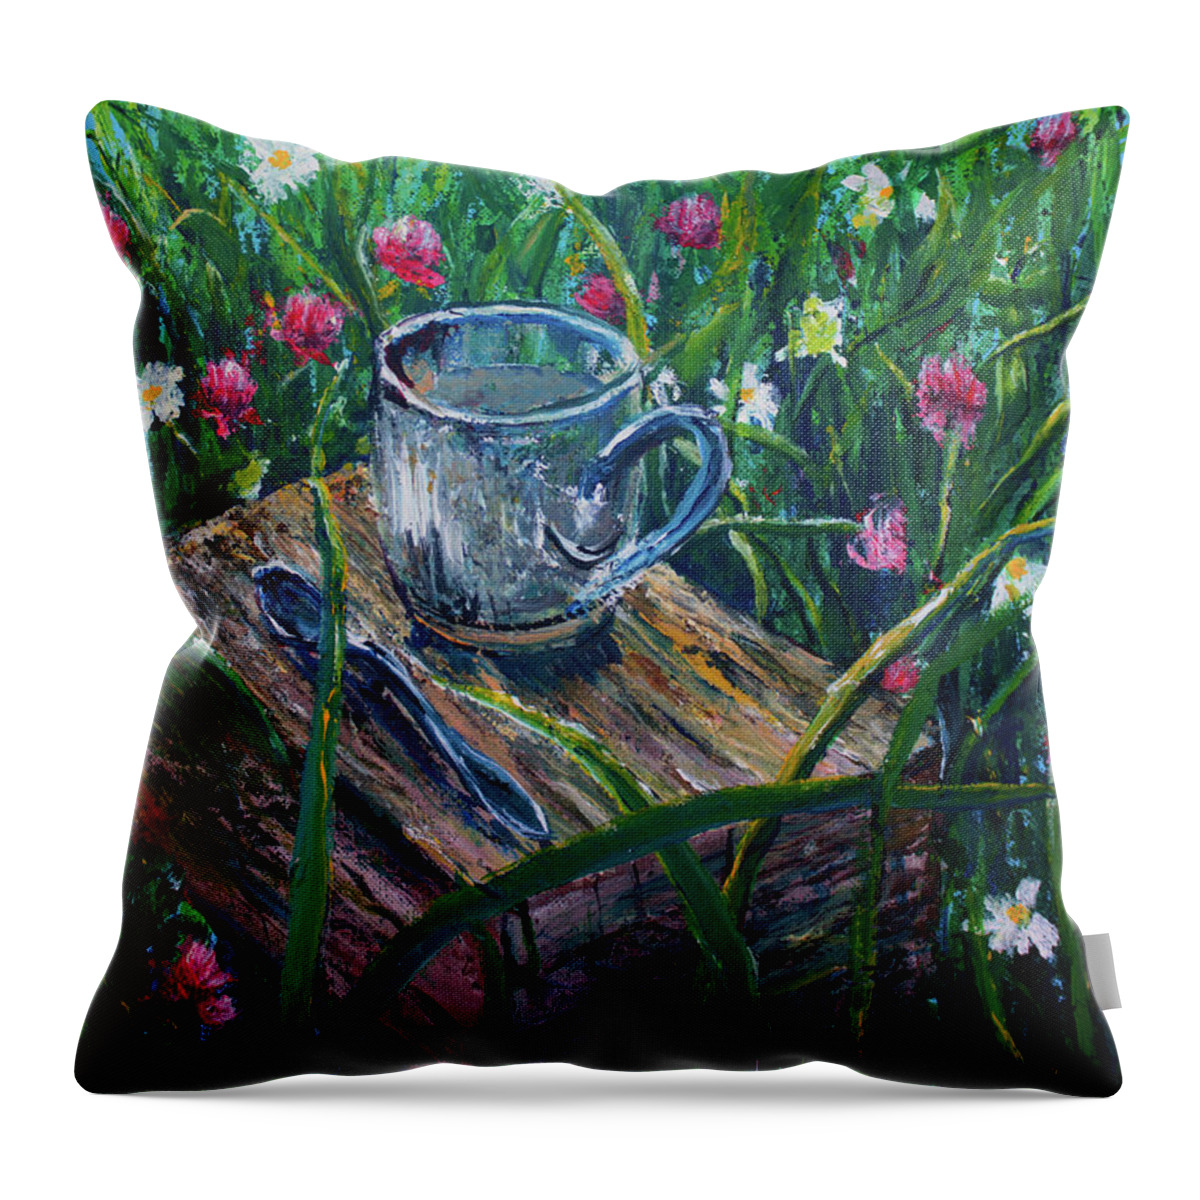 Green Throw Pillow featuring the painting In The Green by Medea Ioseliani